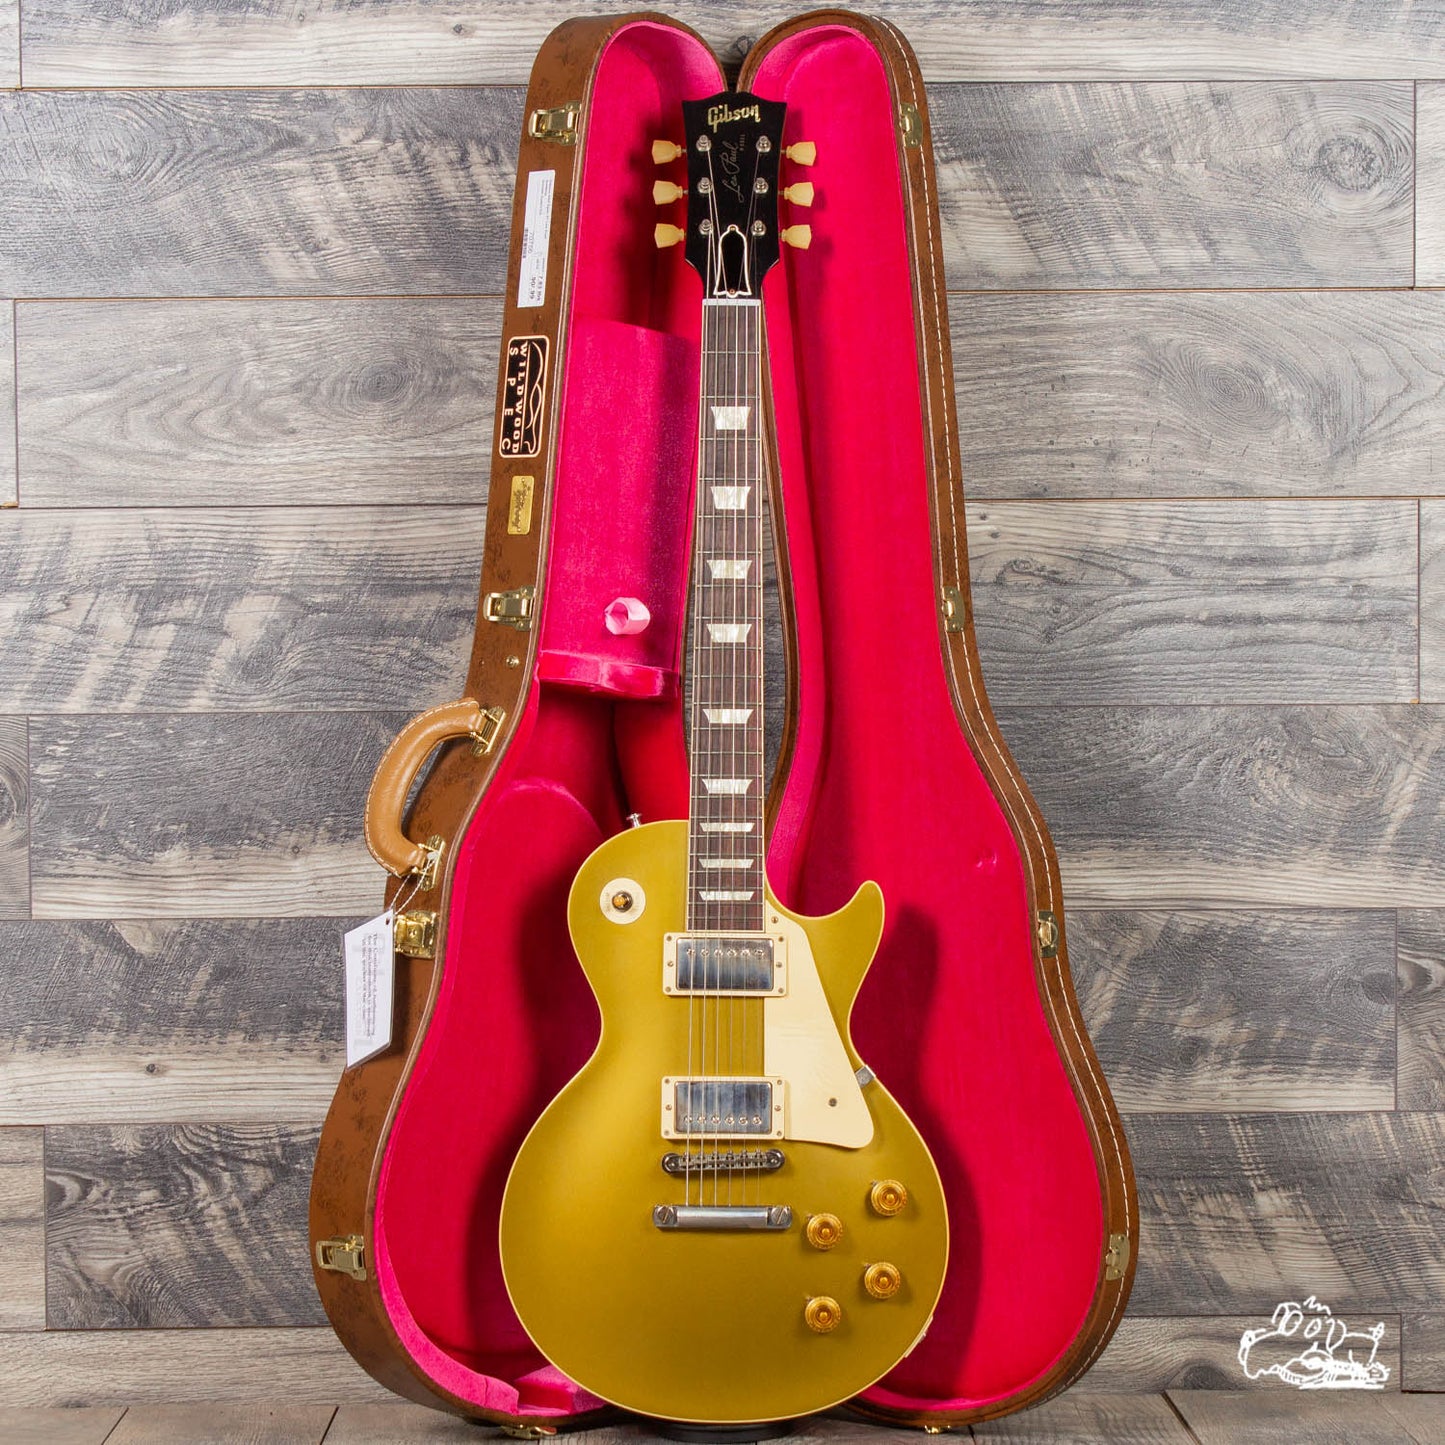 2020 Gibson Custom Shop '57 Reissue VOS with Wildwood Specifications 7 lbs 12 oz